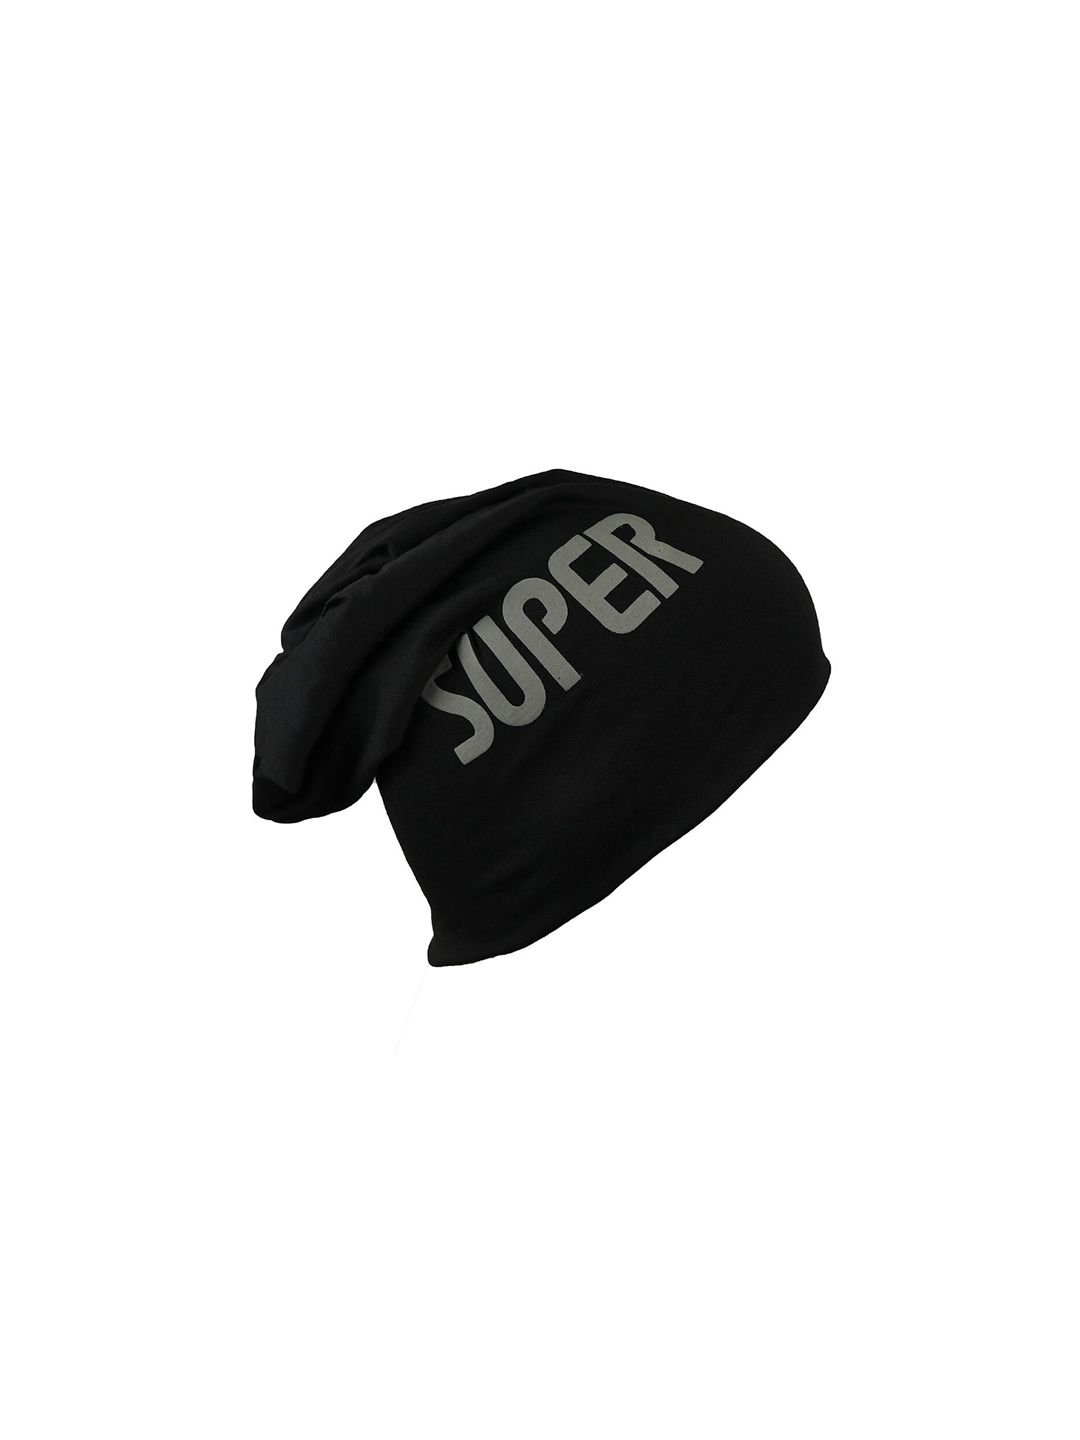 iSWEVEN Unisex Black & Grey Printed Beanie Price in India